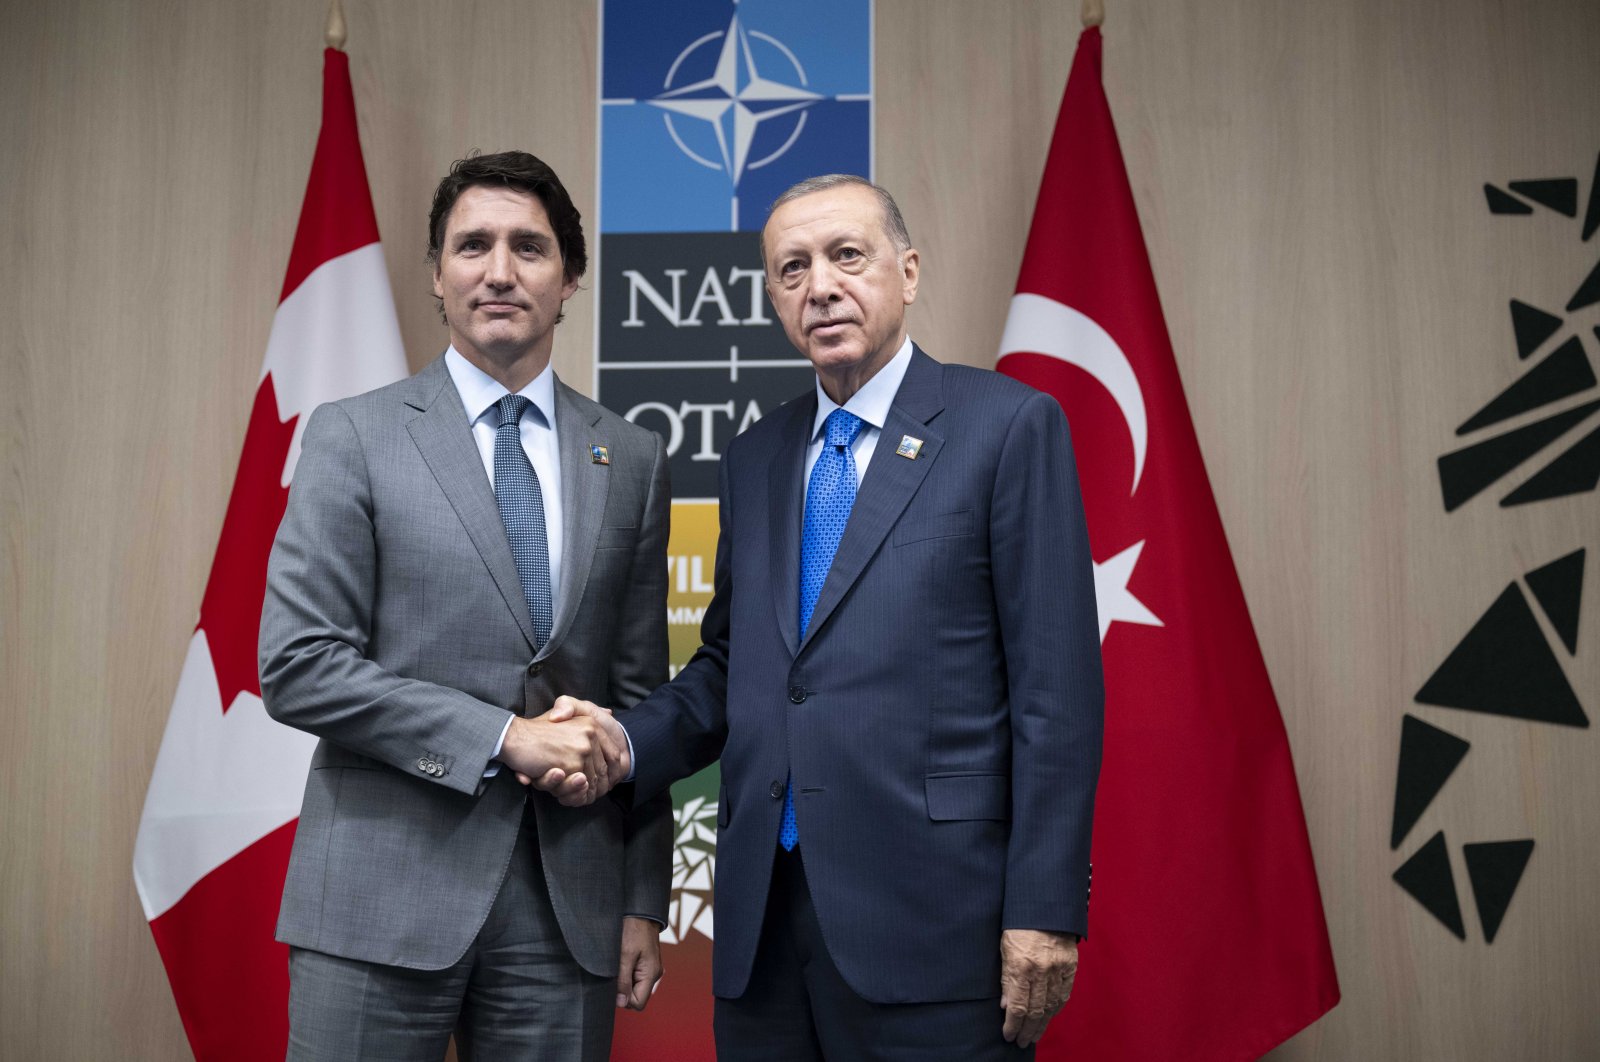 President Recep Tayyip Erdoğan meets with Canadian Prime Minister Justin Trudeau ahead of a NATO leaders summit in Vilnius, Lithuania, July 11, 2023. (AA Photo)